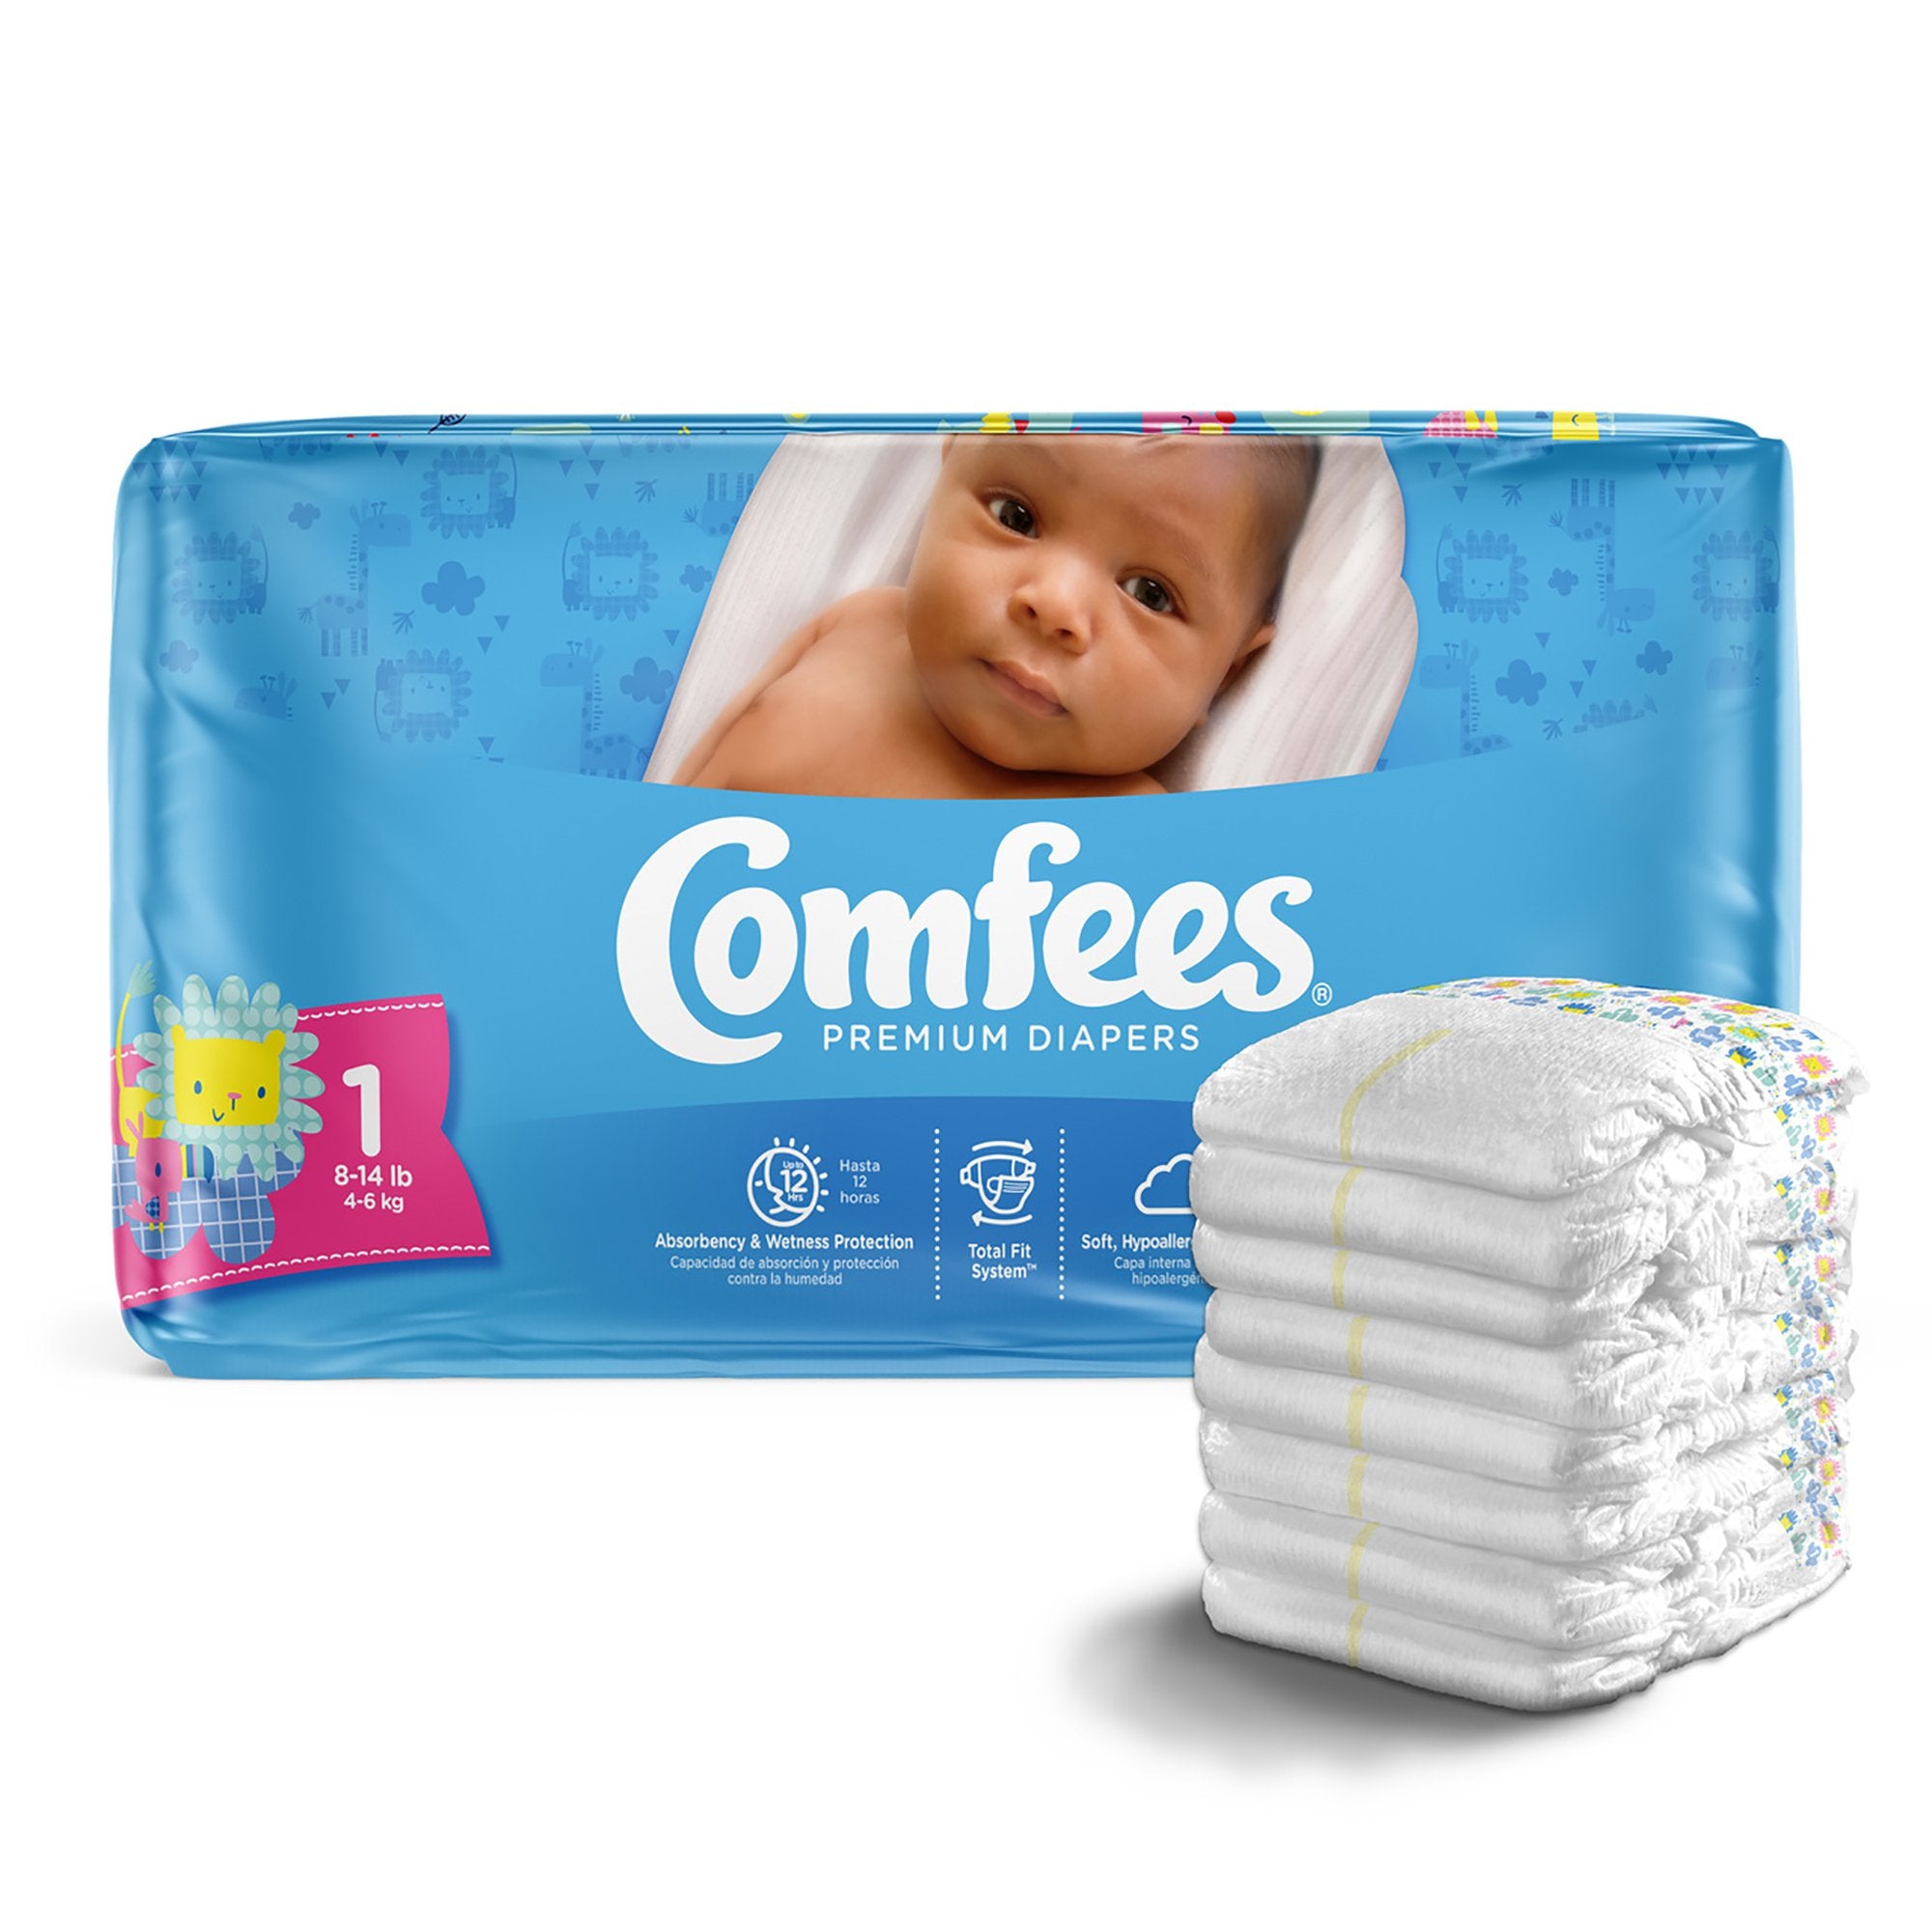 Unisex Baby Diaper Comfees Size 1 Disposable Moderate Absorbency